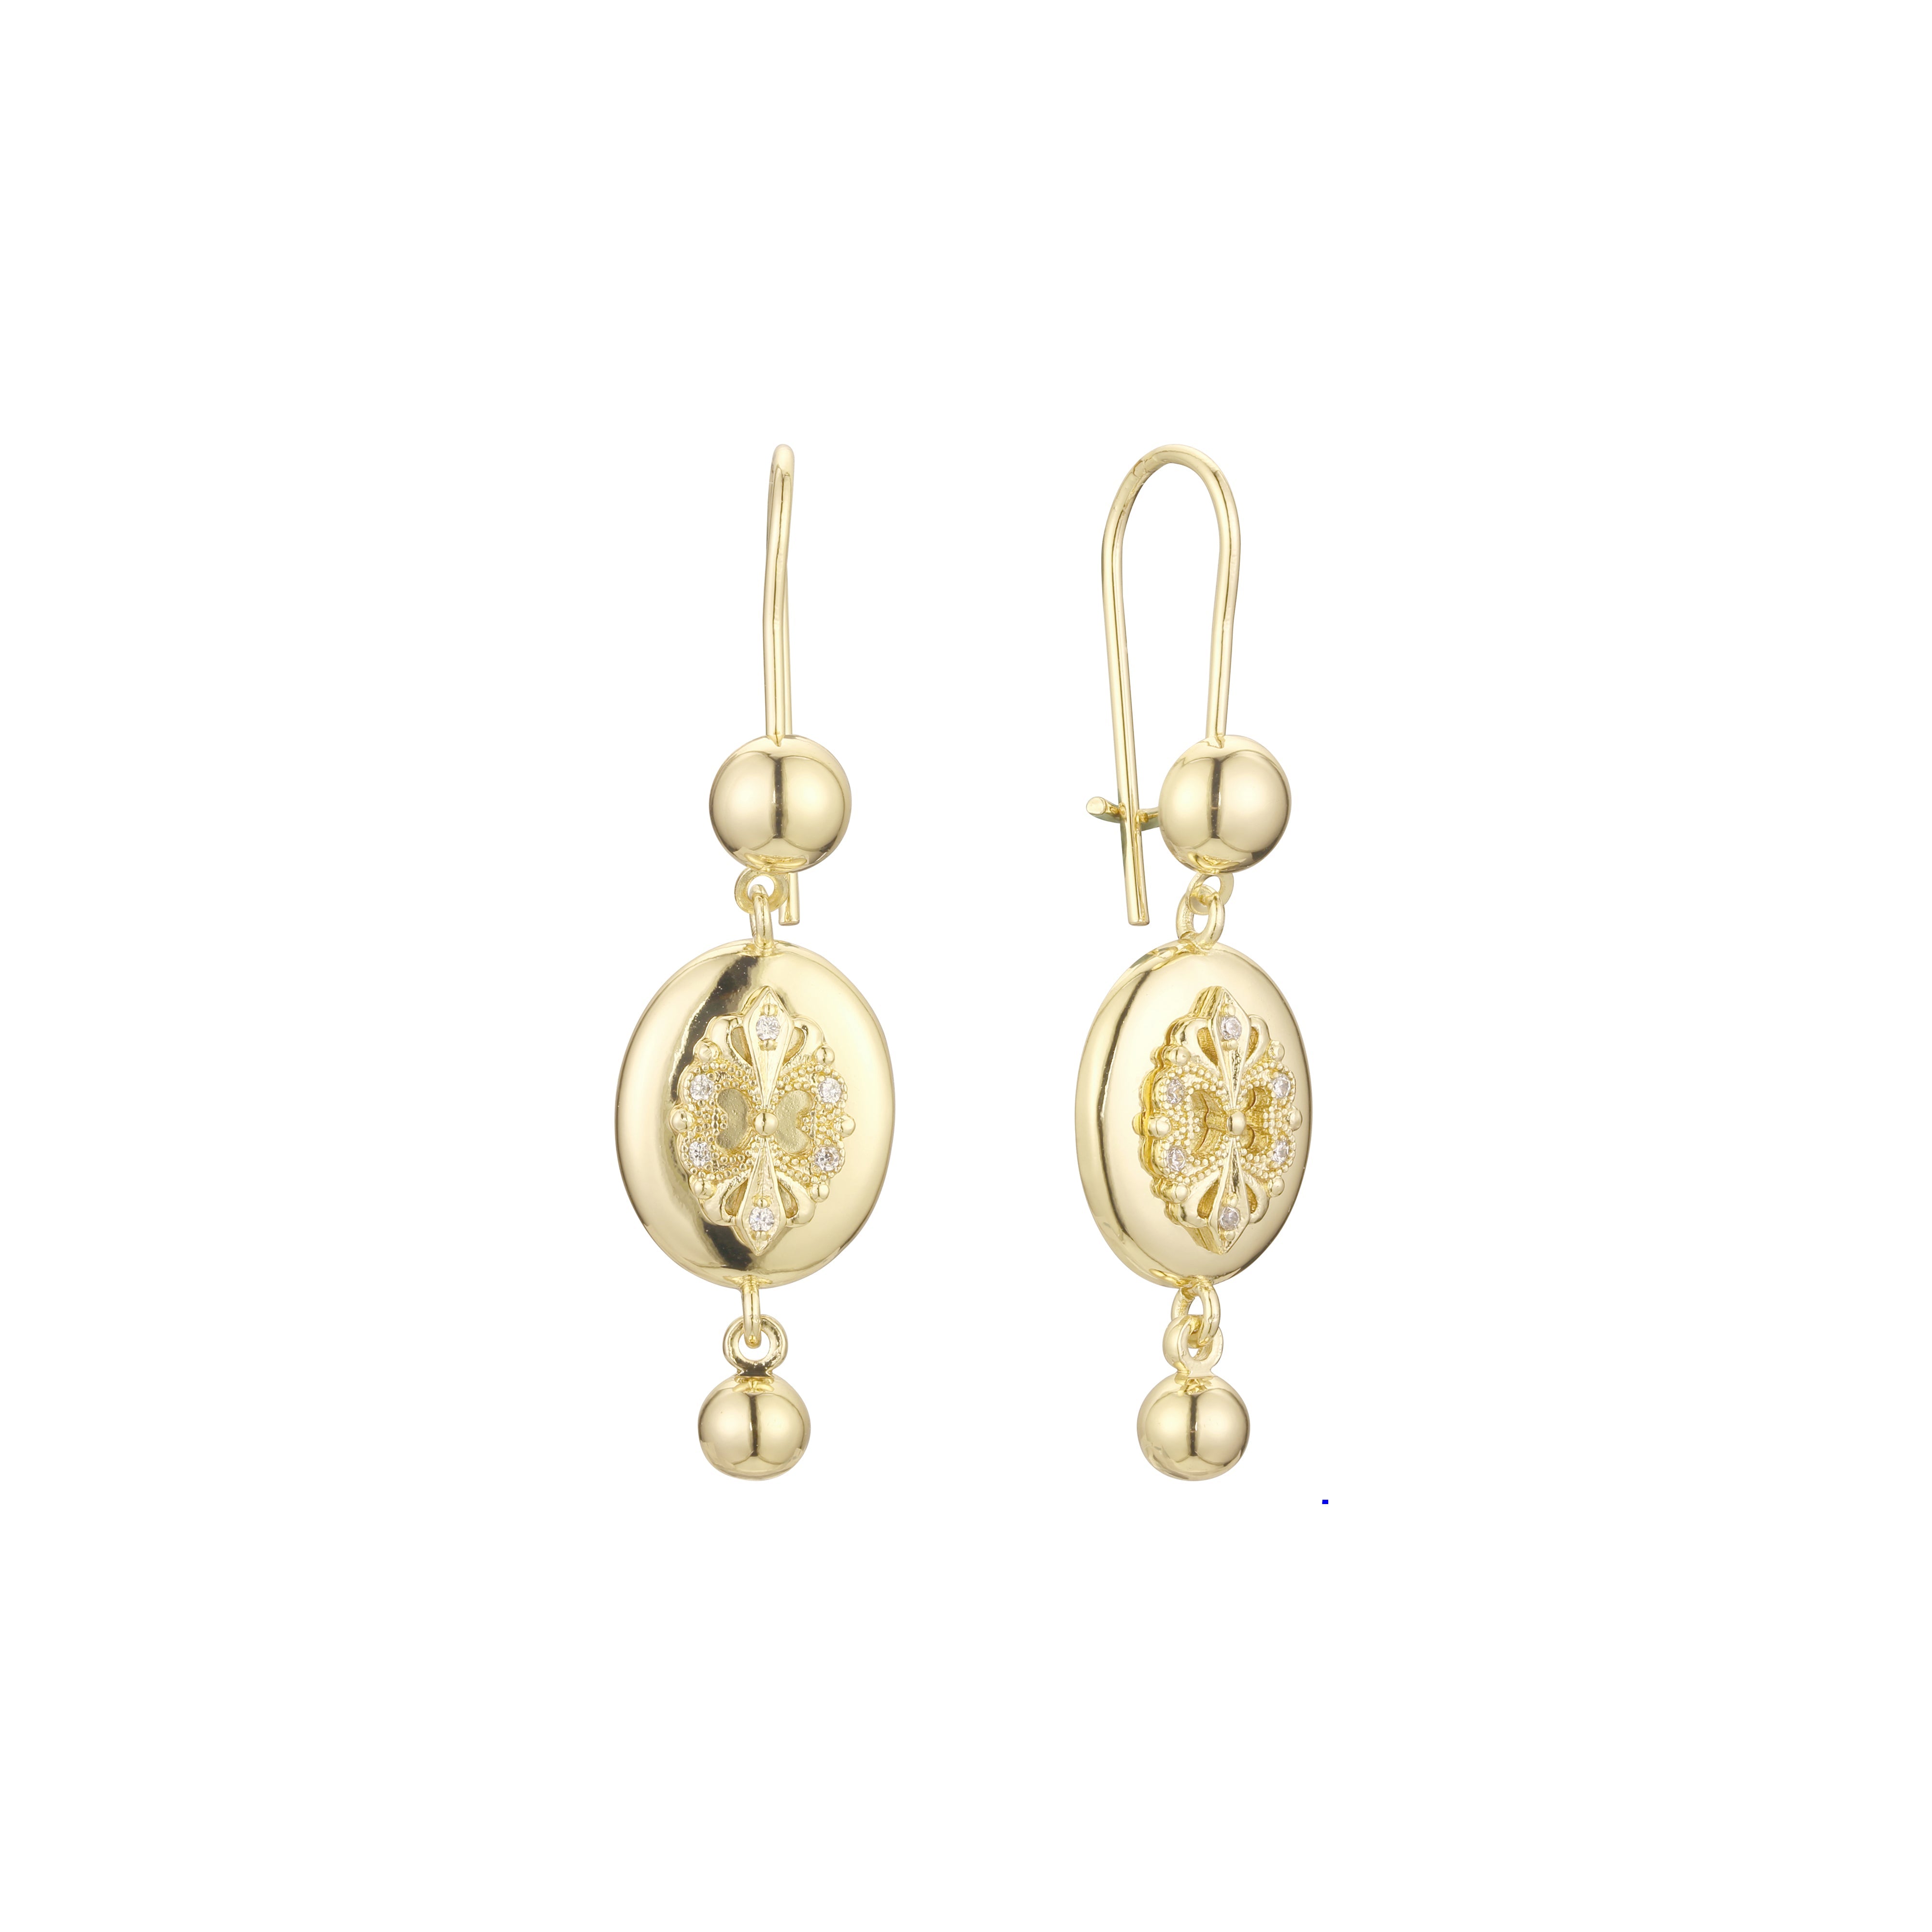 Beads cluster wire hook earrings in 14K Gold, Rose Gold plating colors